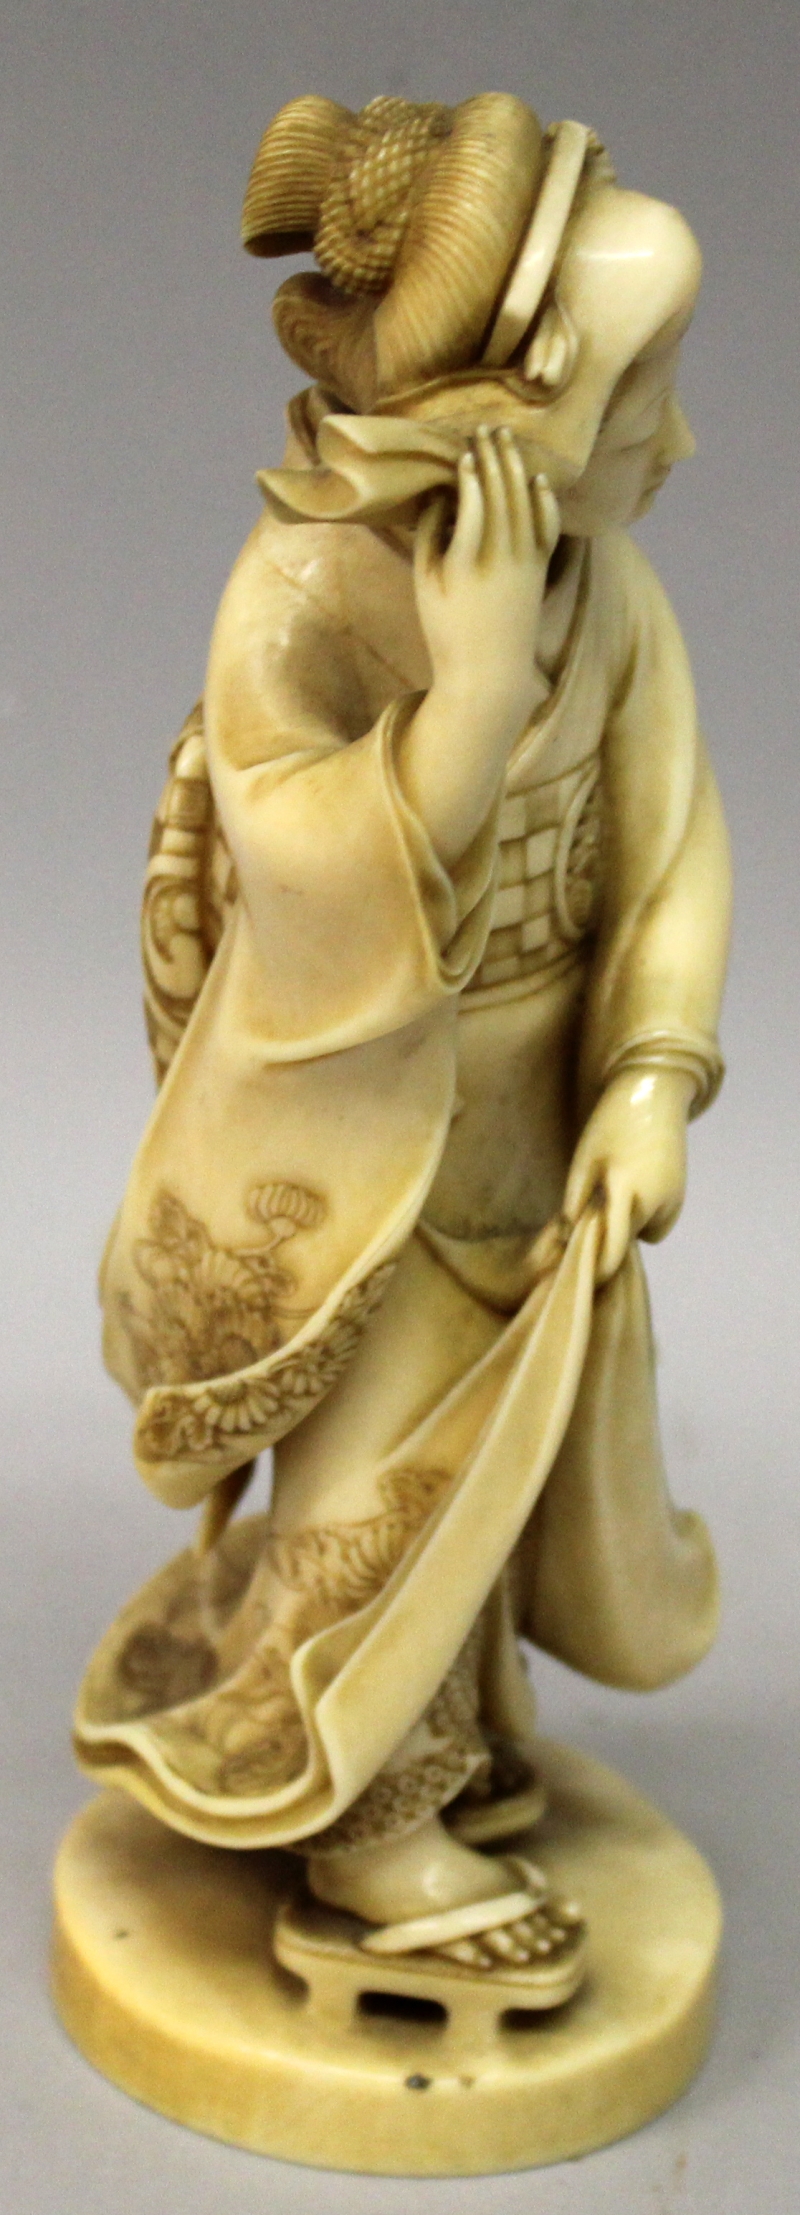 A GOOD QUALITY SIGNED JAPANESE MEIJI PERIOD IVORY OKIMONO OF A BIJIN, walking on geta in floral - Image 2 of 7